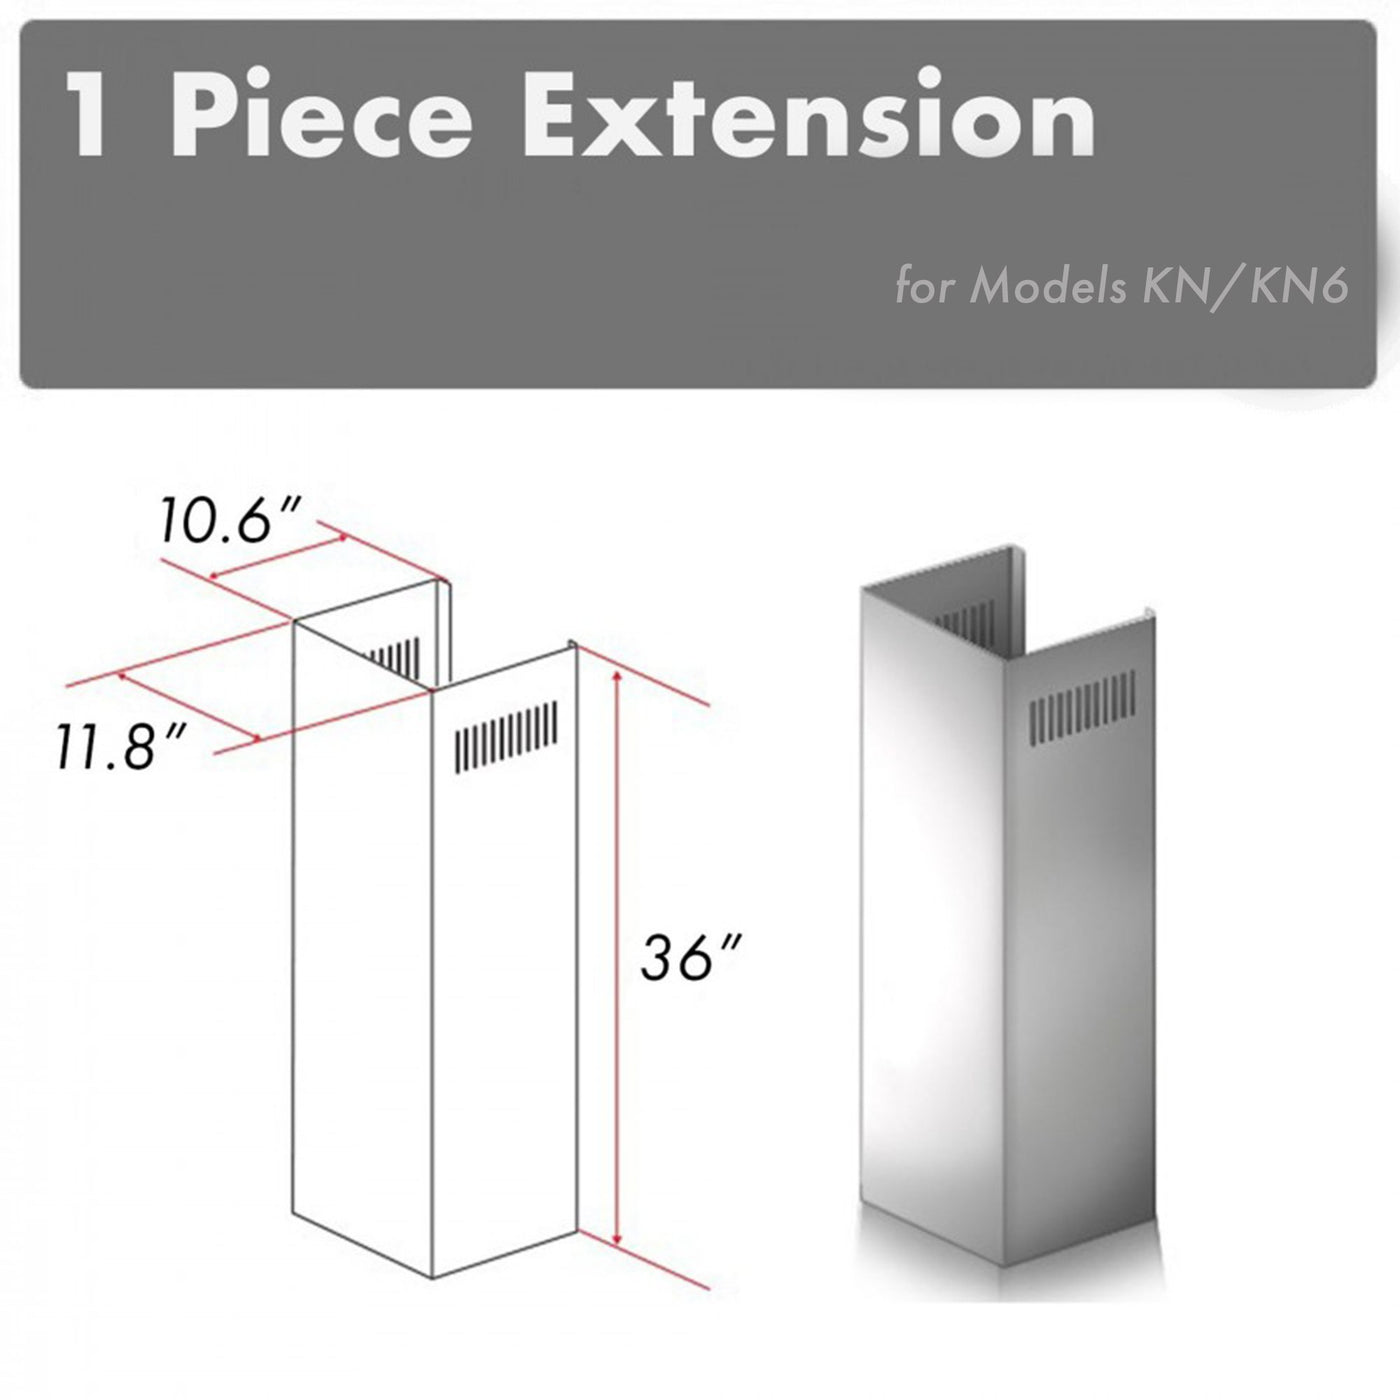 ZLINE 1-36" Chimney Extension for 9 ft. to 10 ft. Ceilings (1PCEXT-KN)